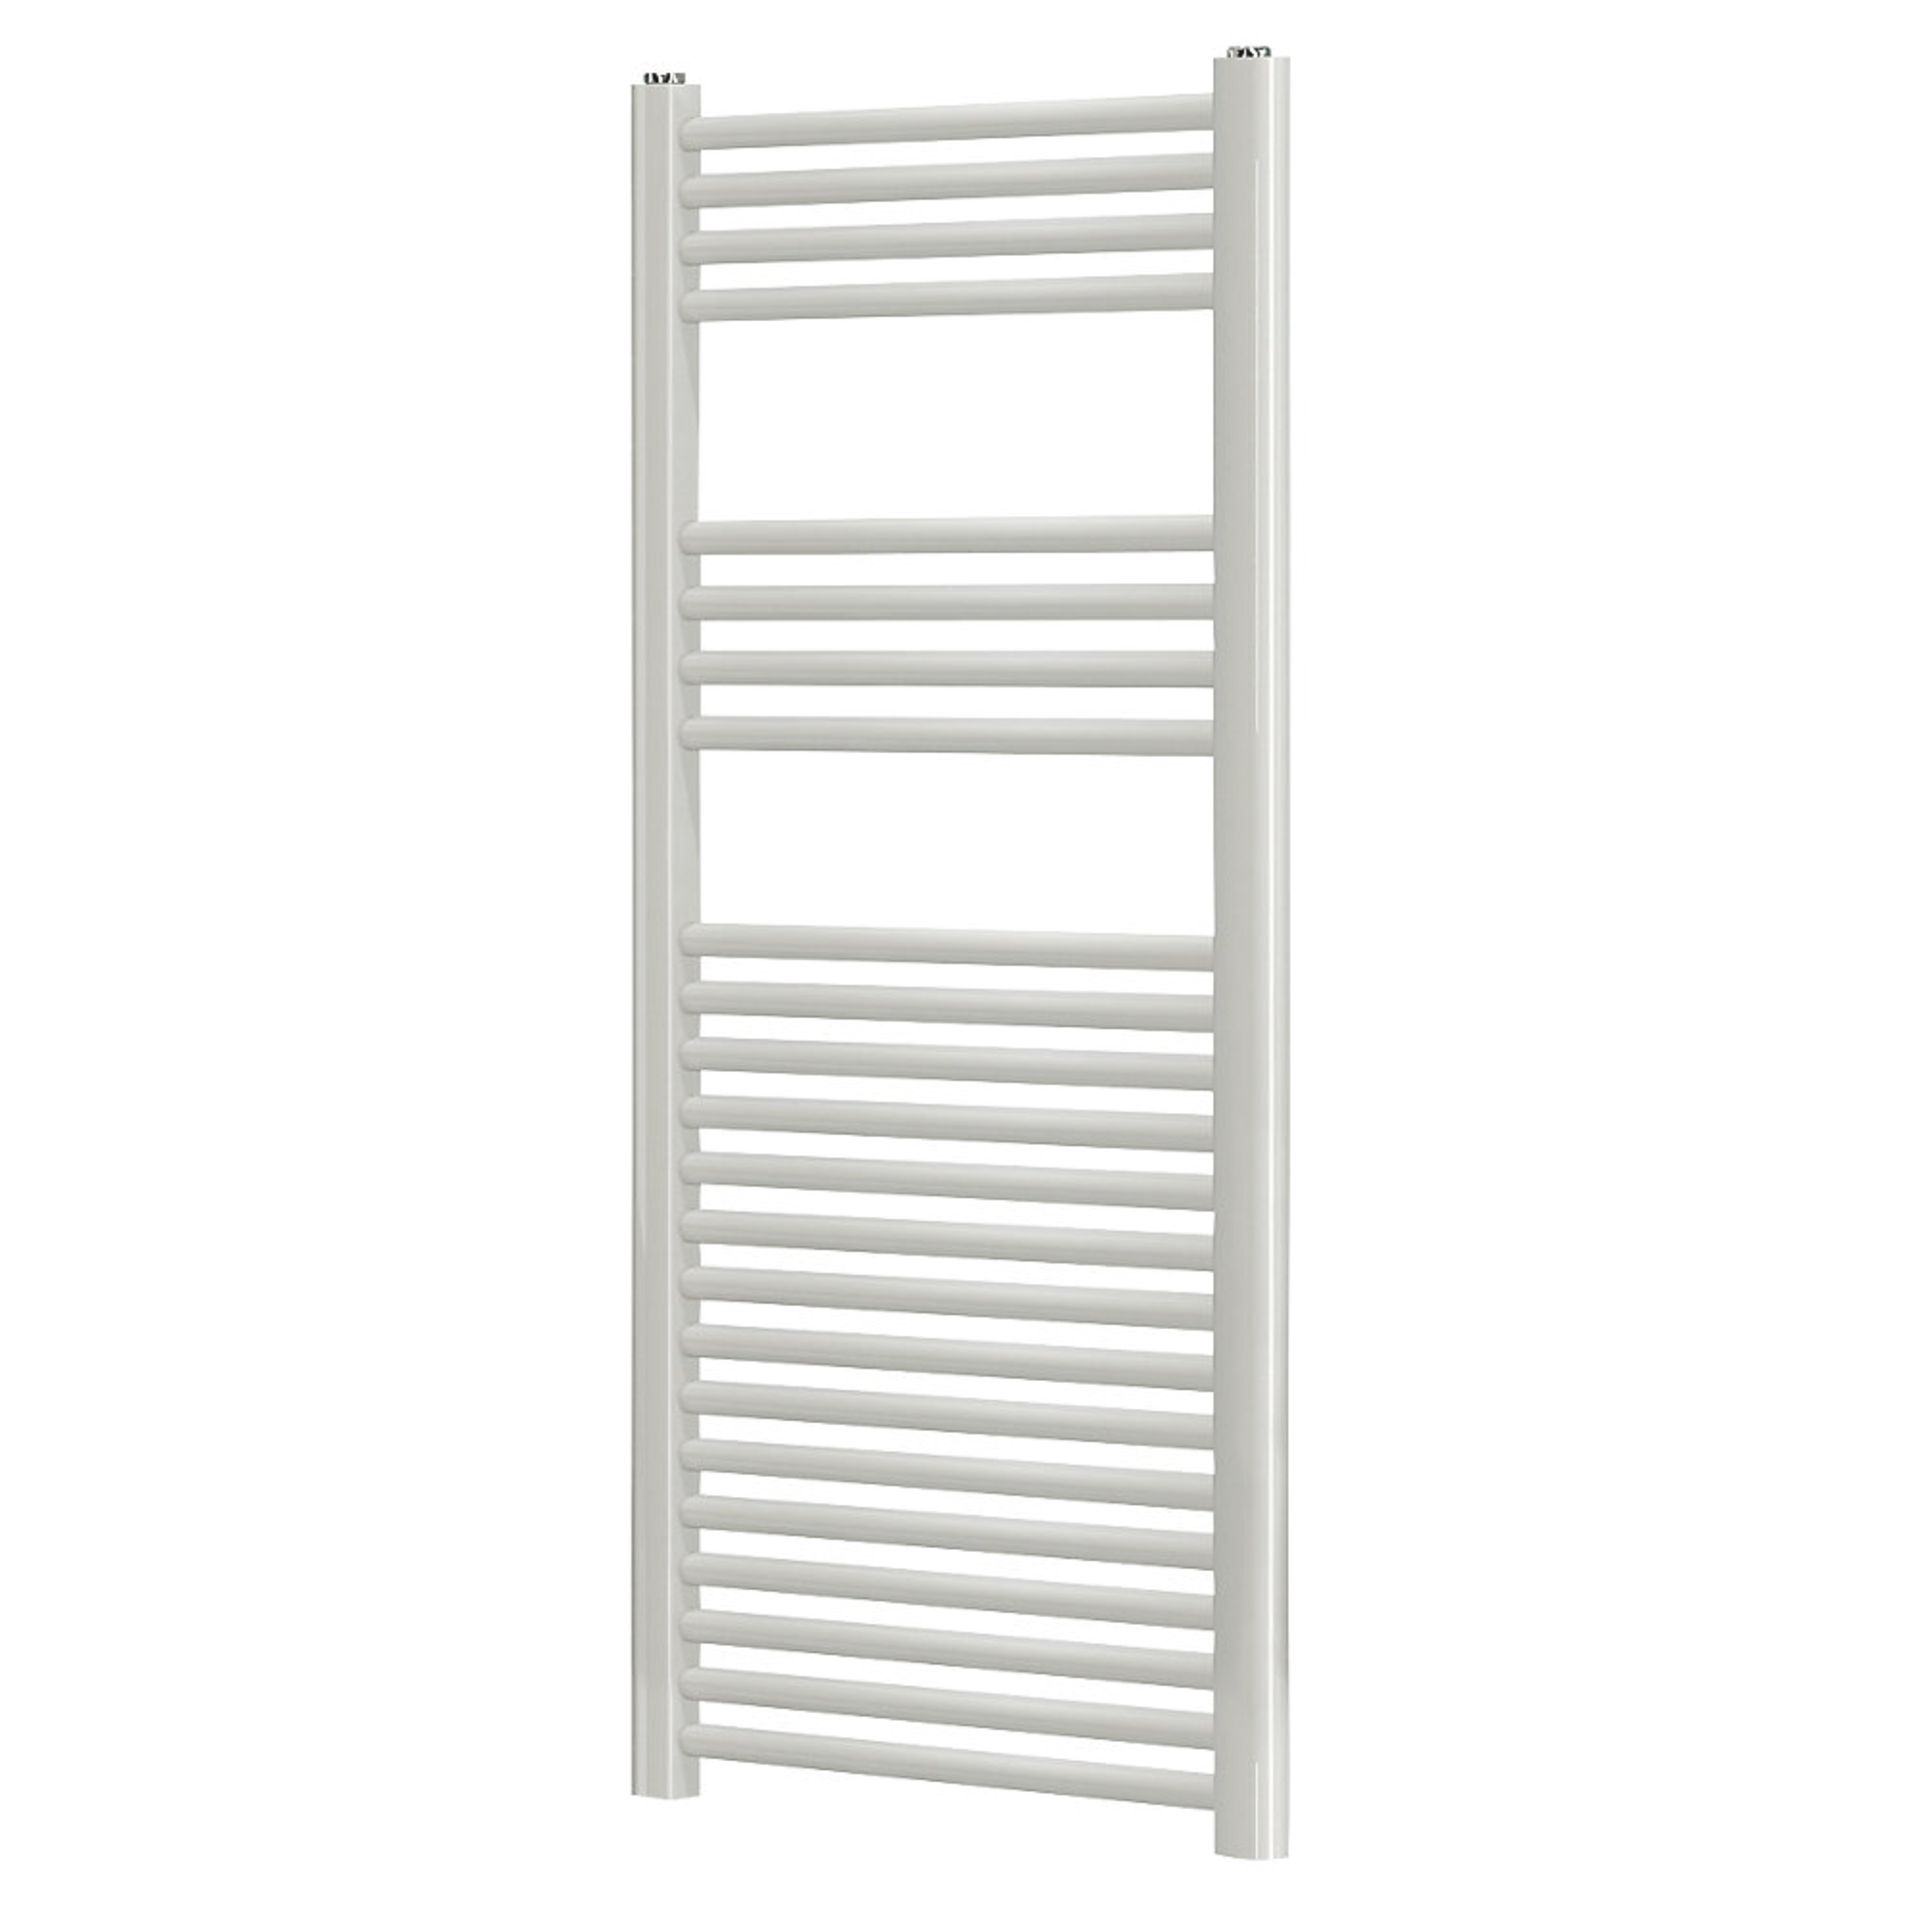 (QW117) 1200x450mm White Heated Towel Radiator. RRP £189.99. Made from low carbon steel FinishedWith